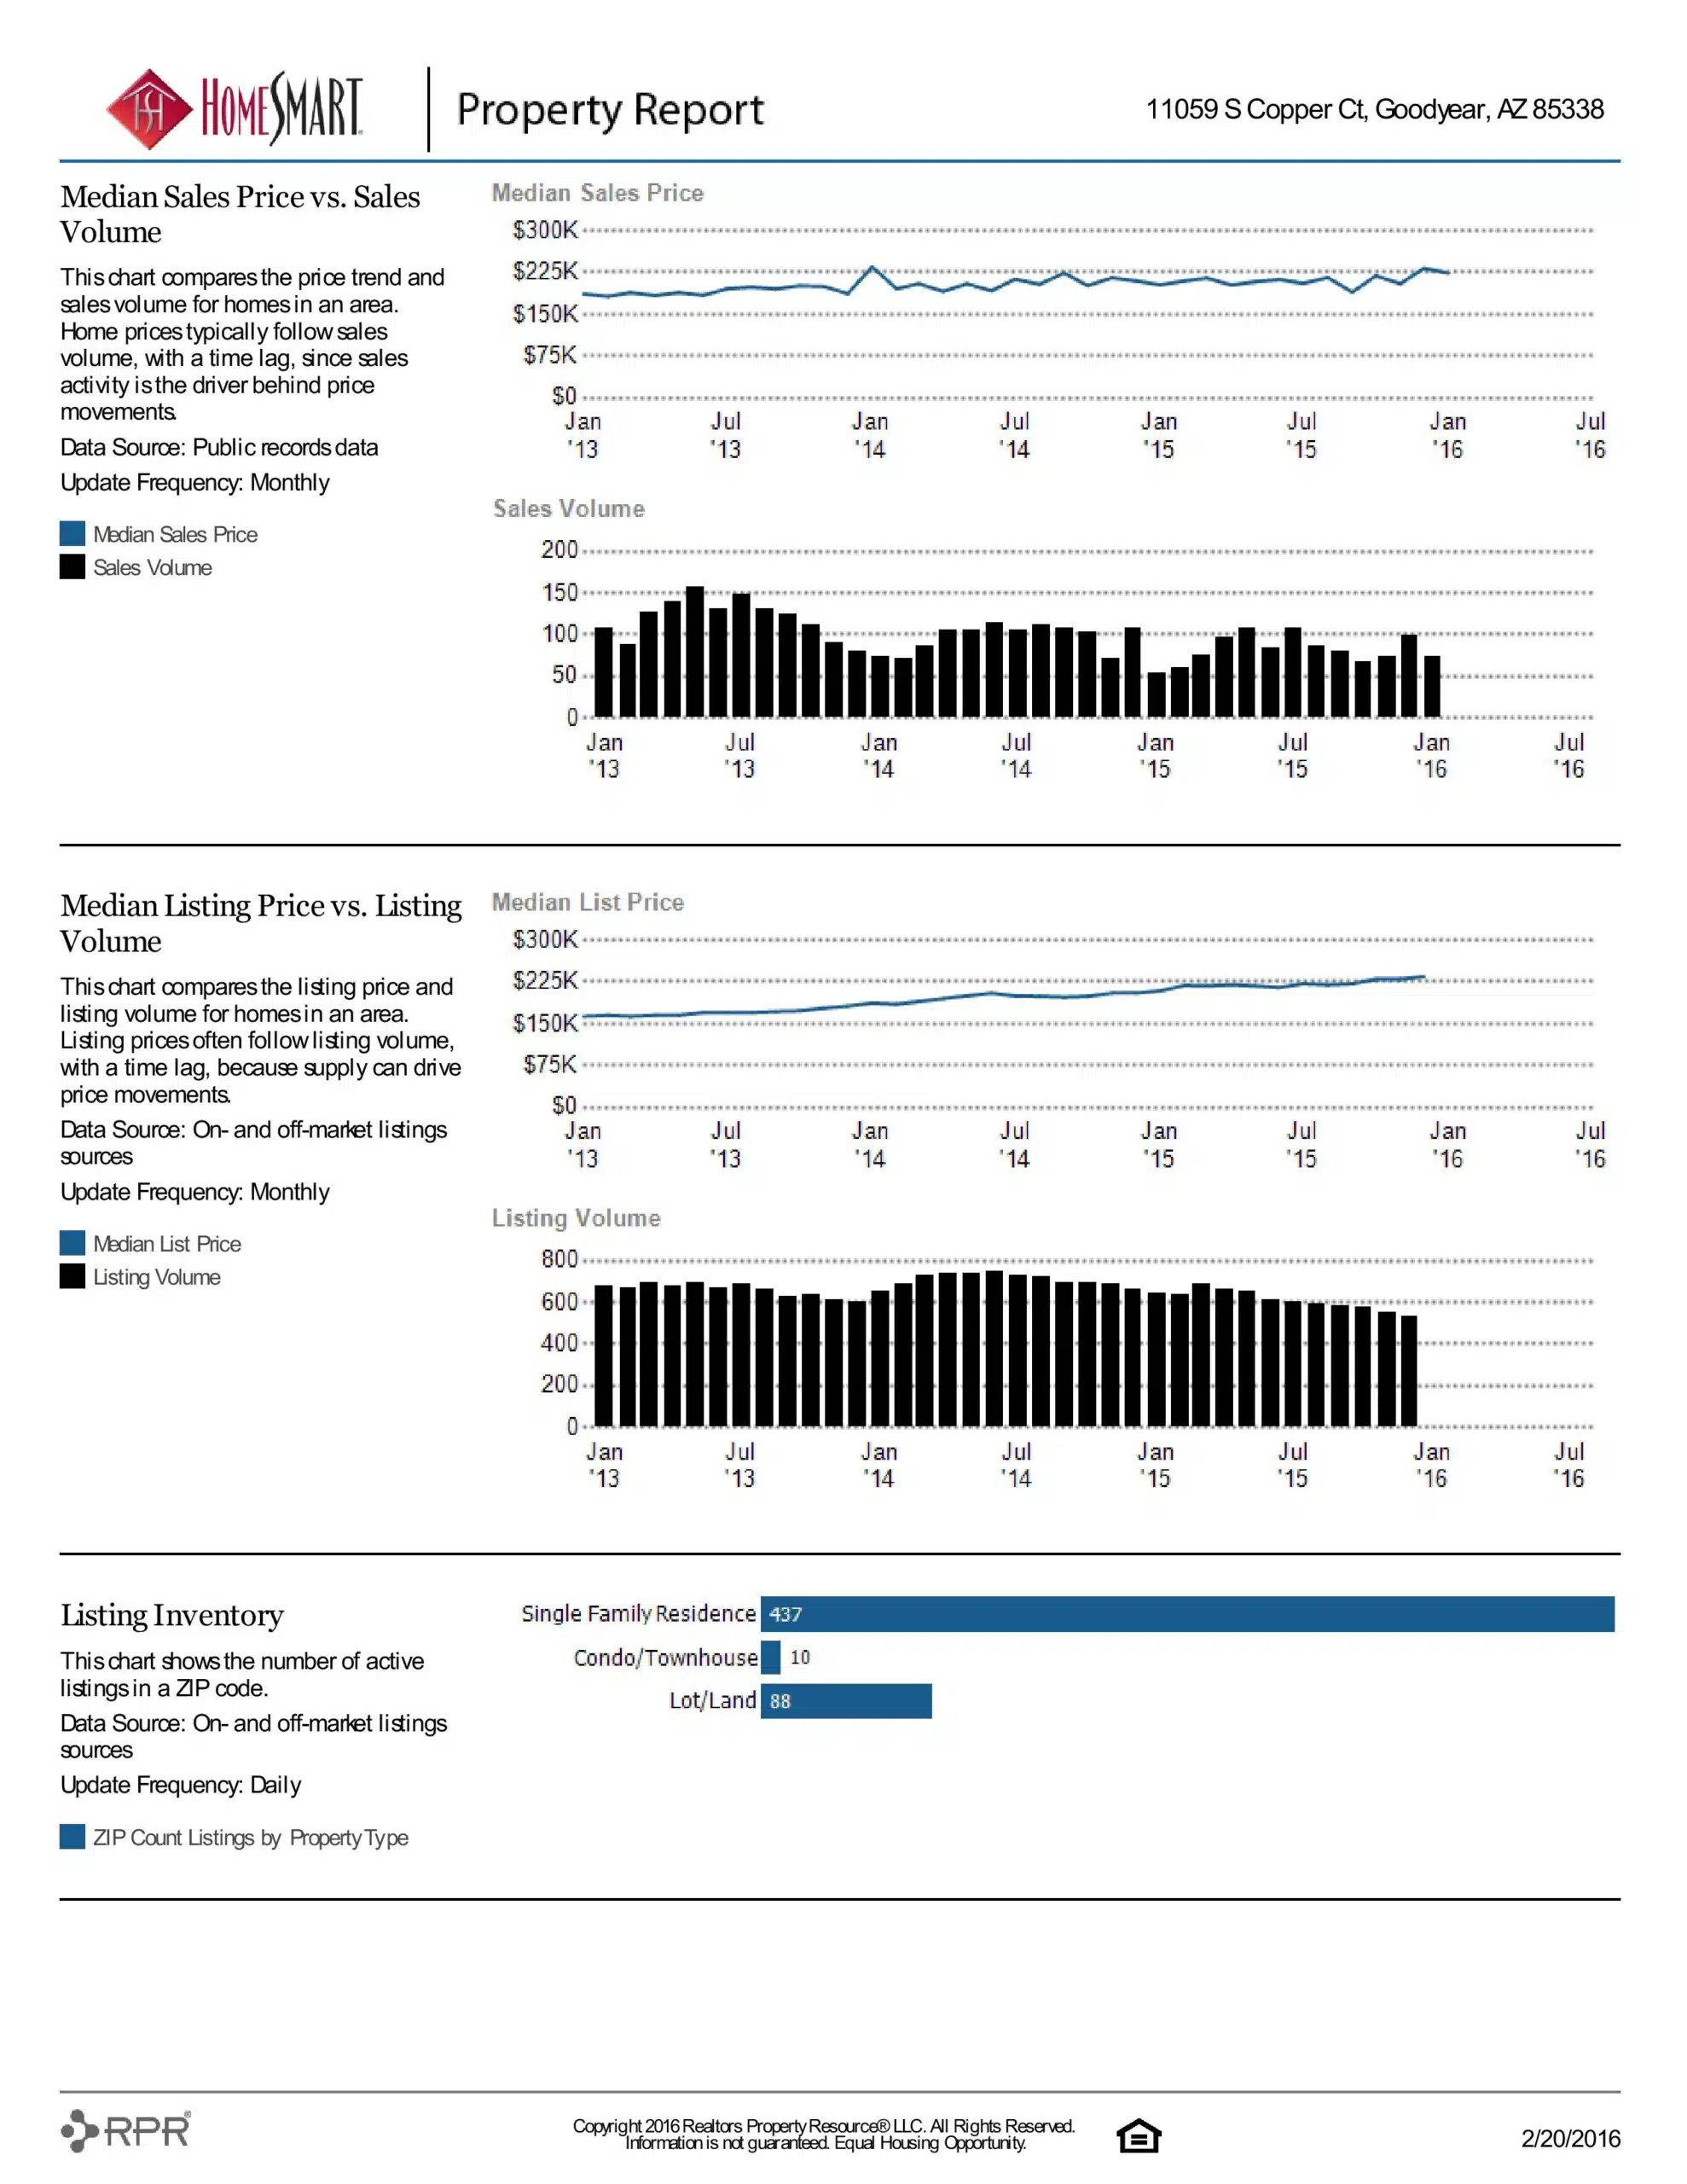 11059 S COPPER CT PROPERTY REPORT-page-018